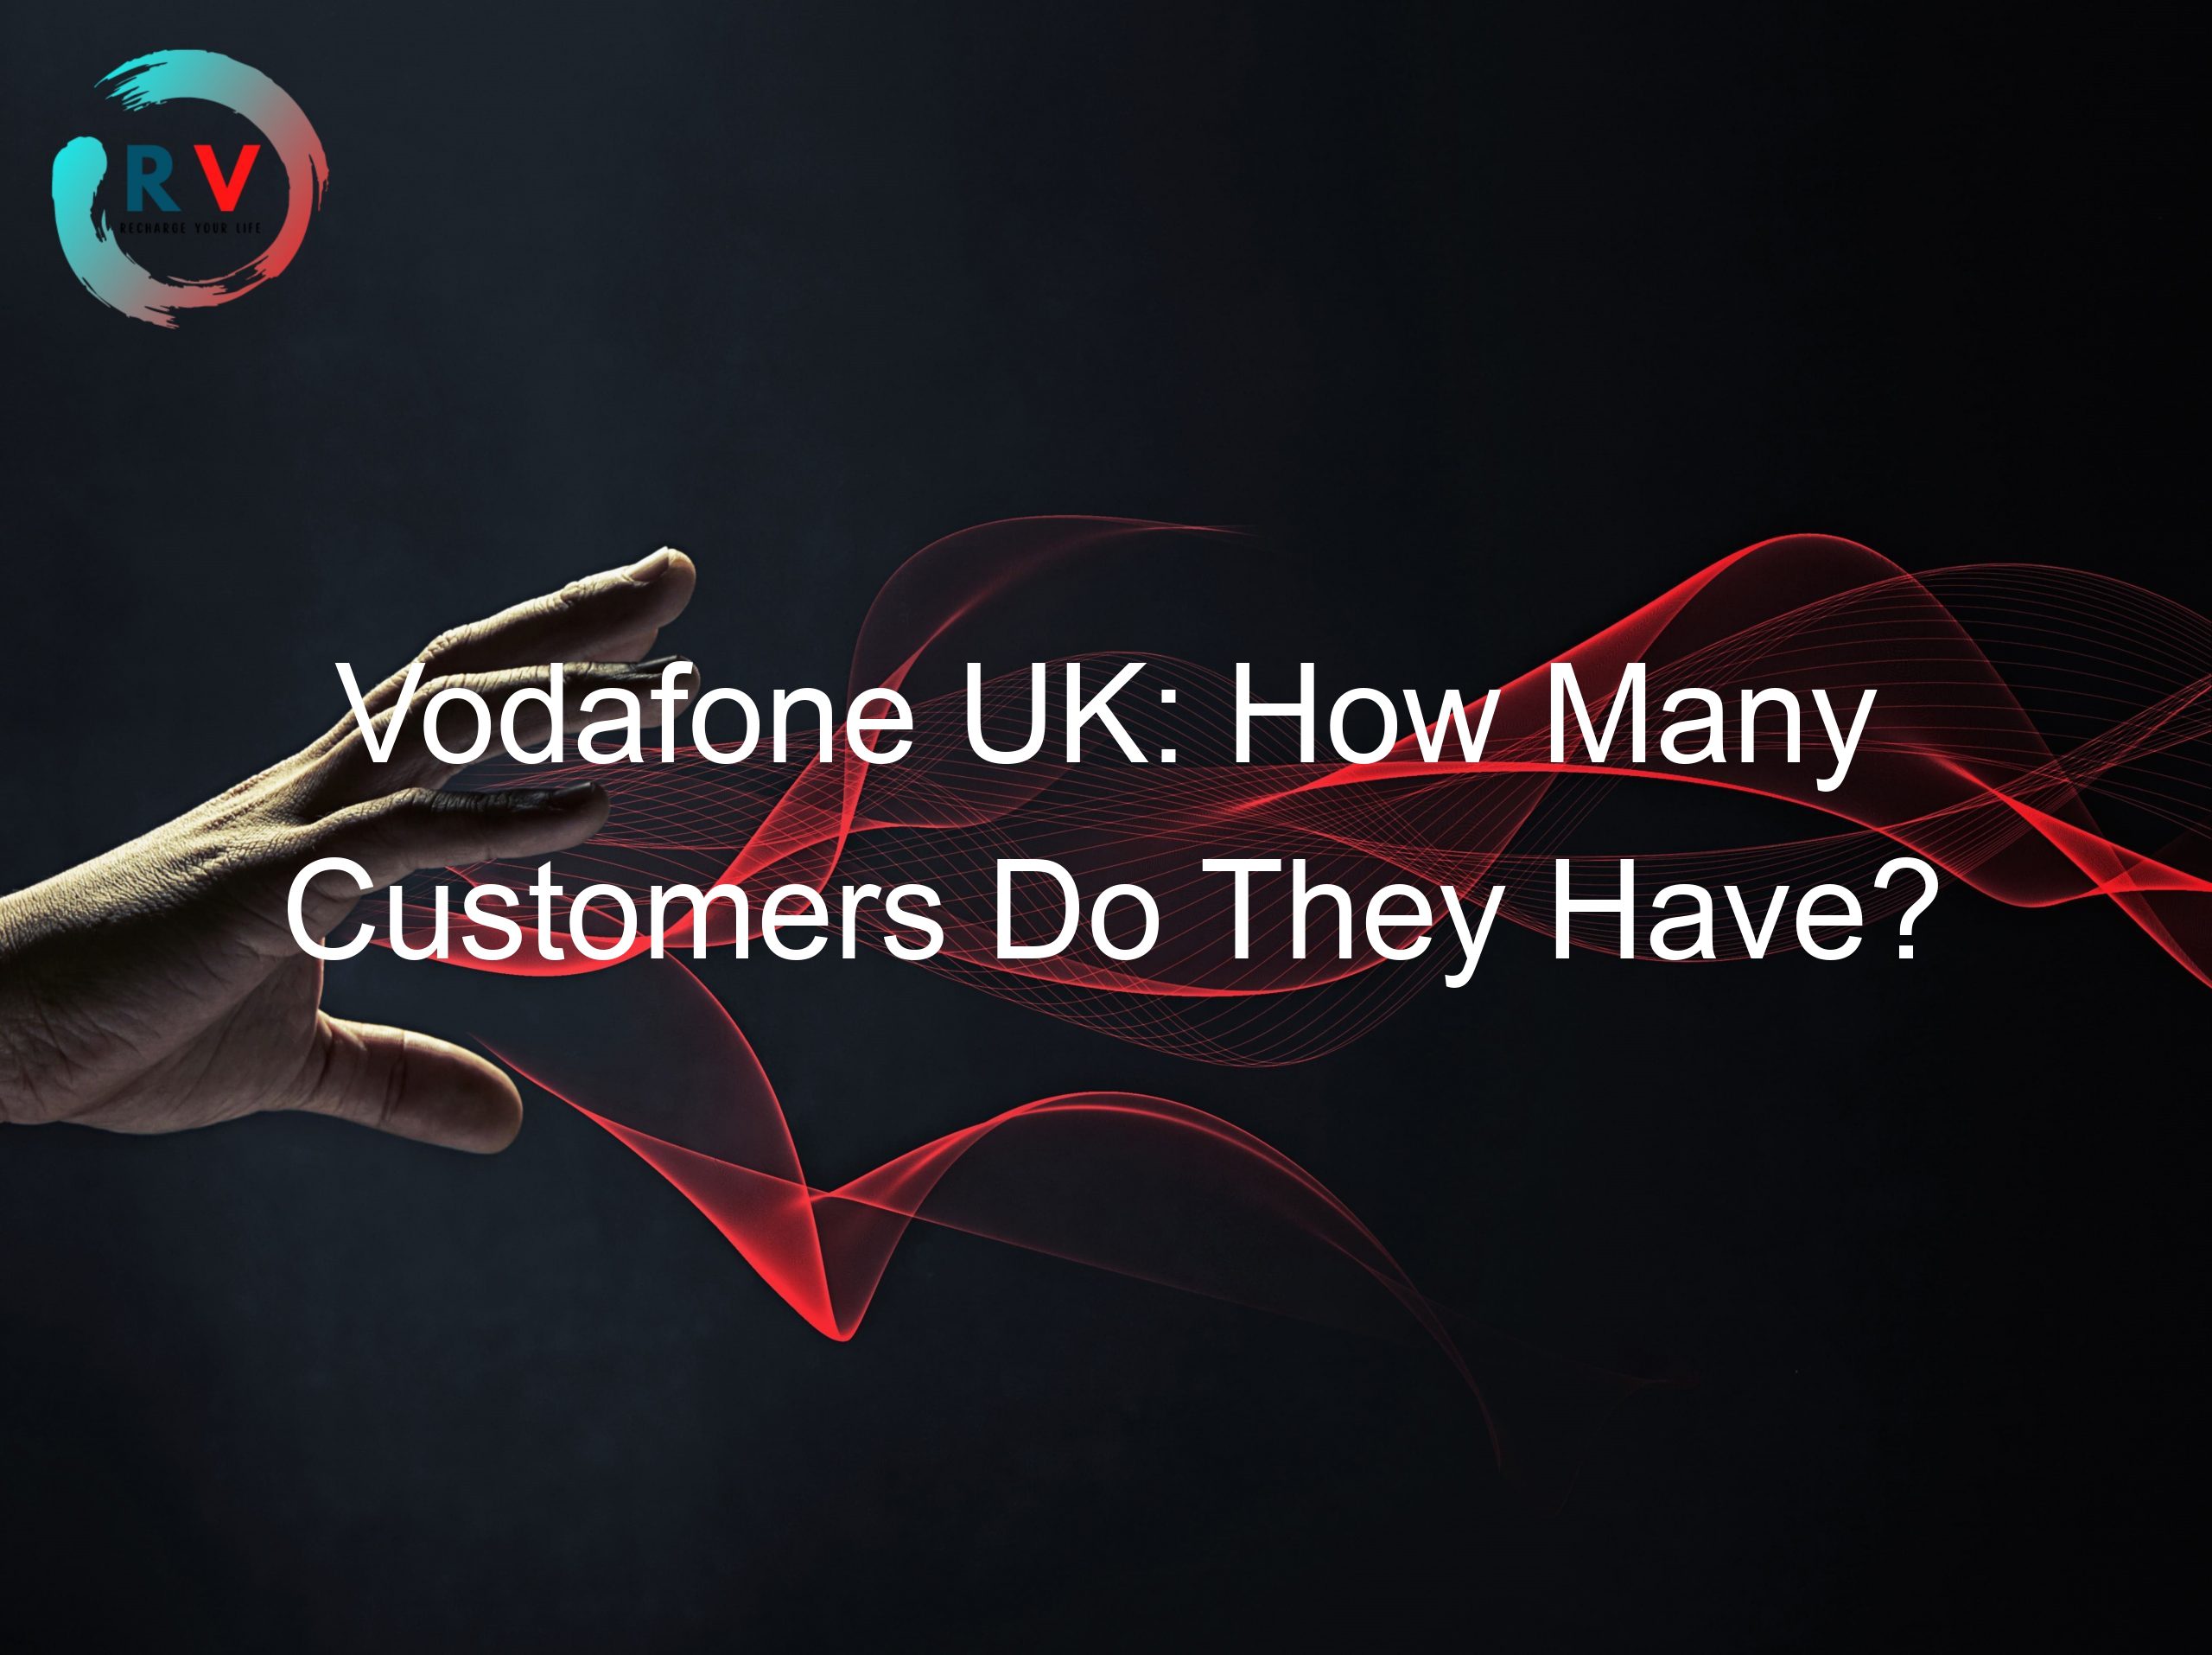 Vodafone UK: How Many Customers Do They Have?